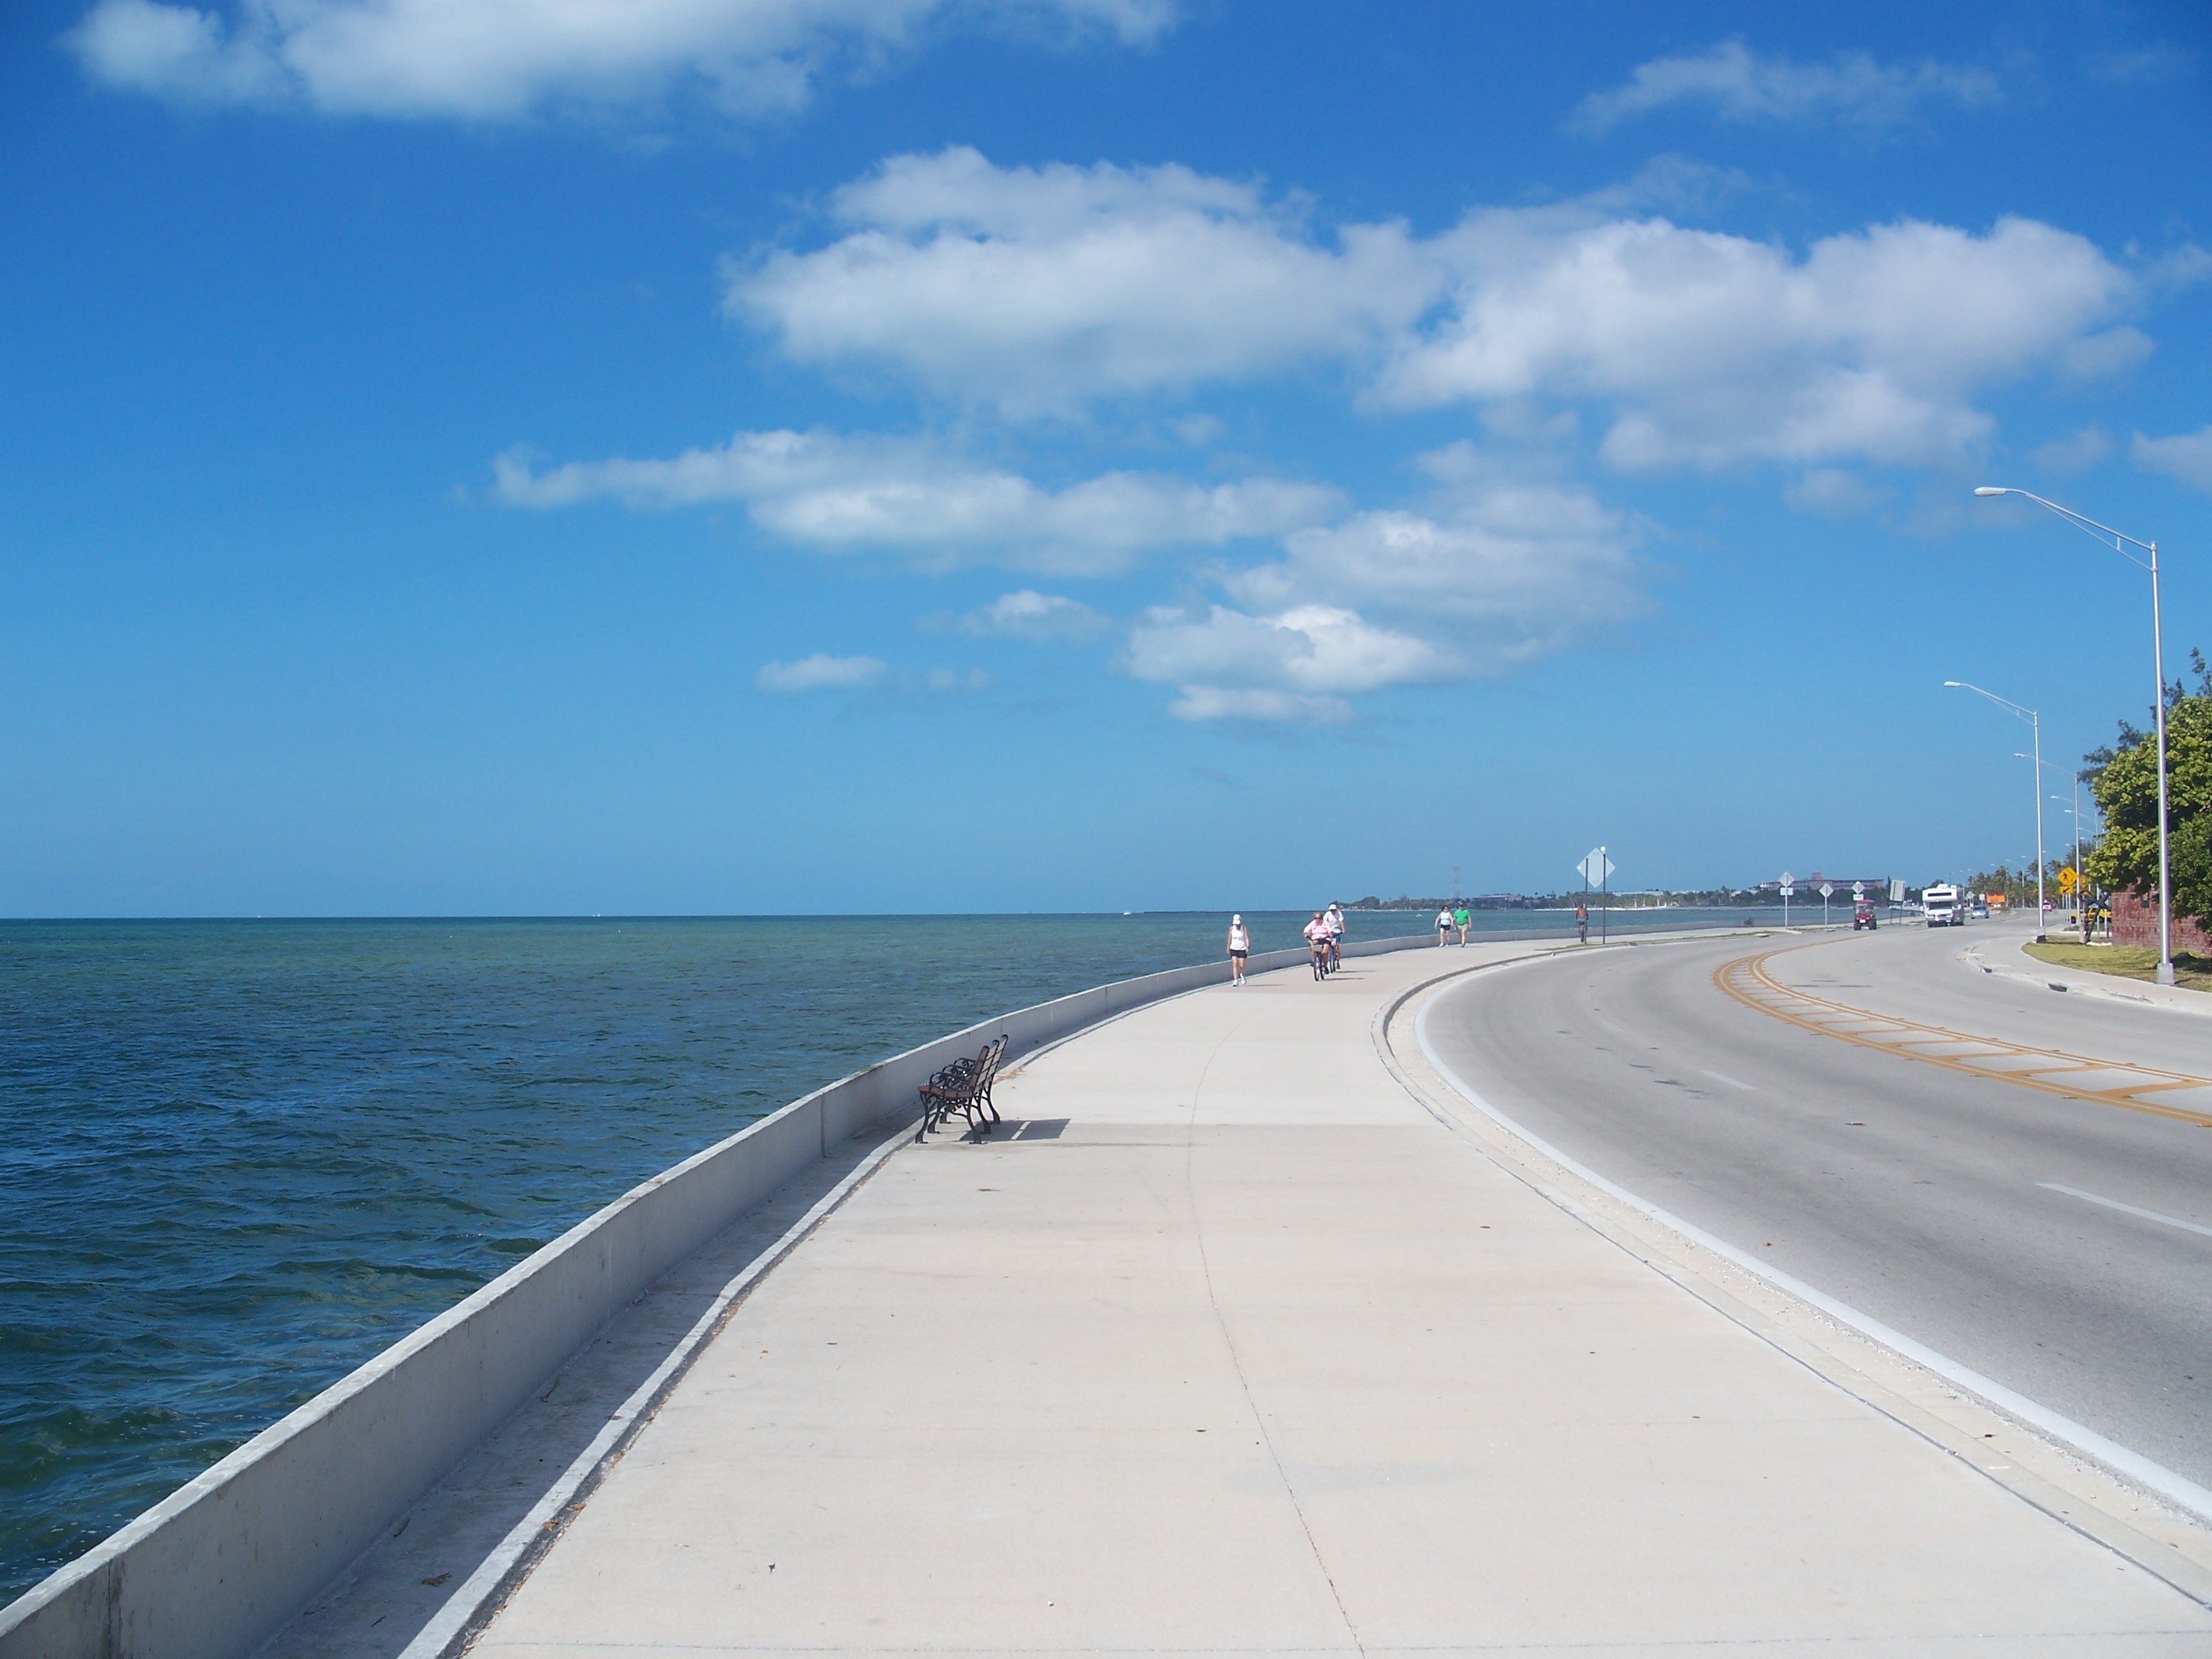 A wide paved path and road curving around the coastline where blue water meets blue sky, with e-bikes and pedestrians in the distance